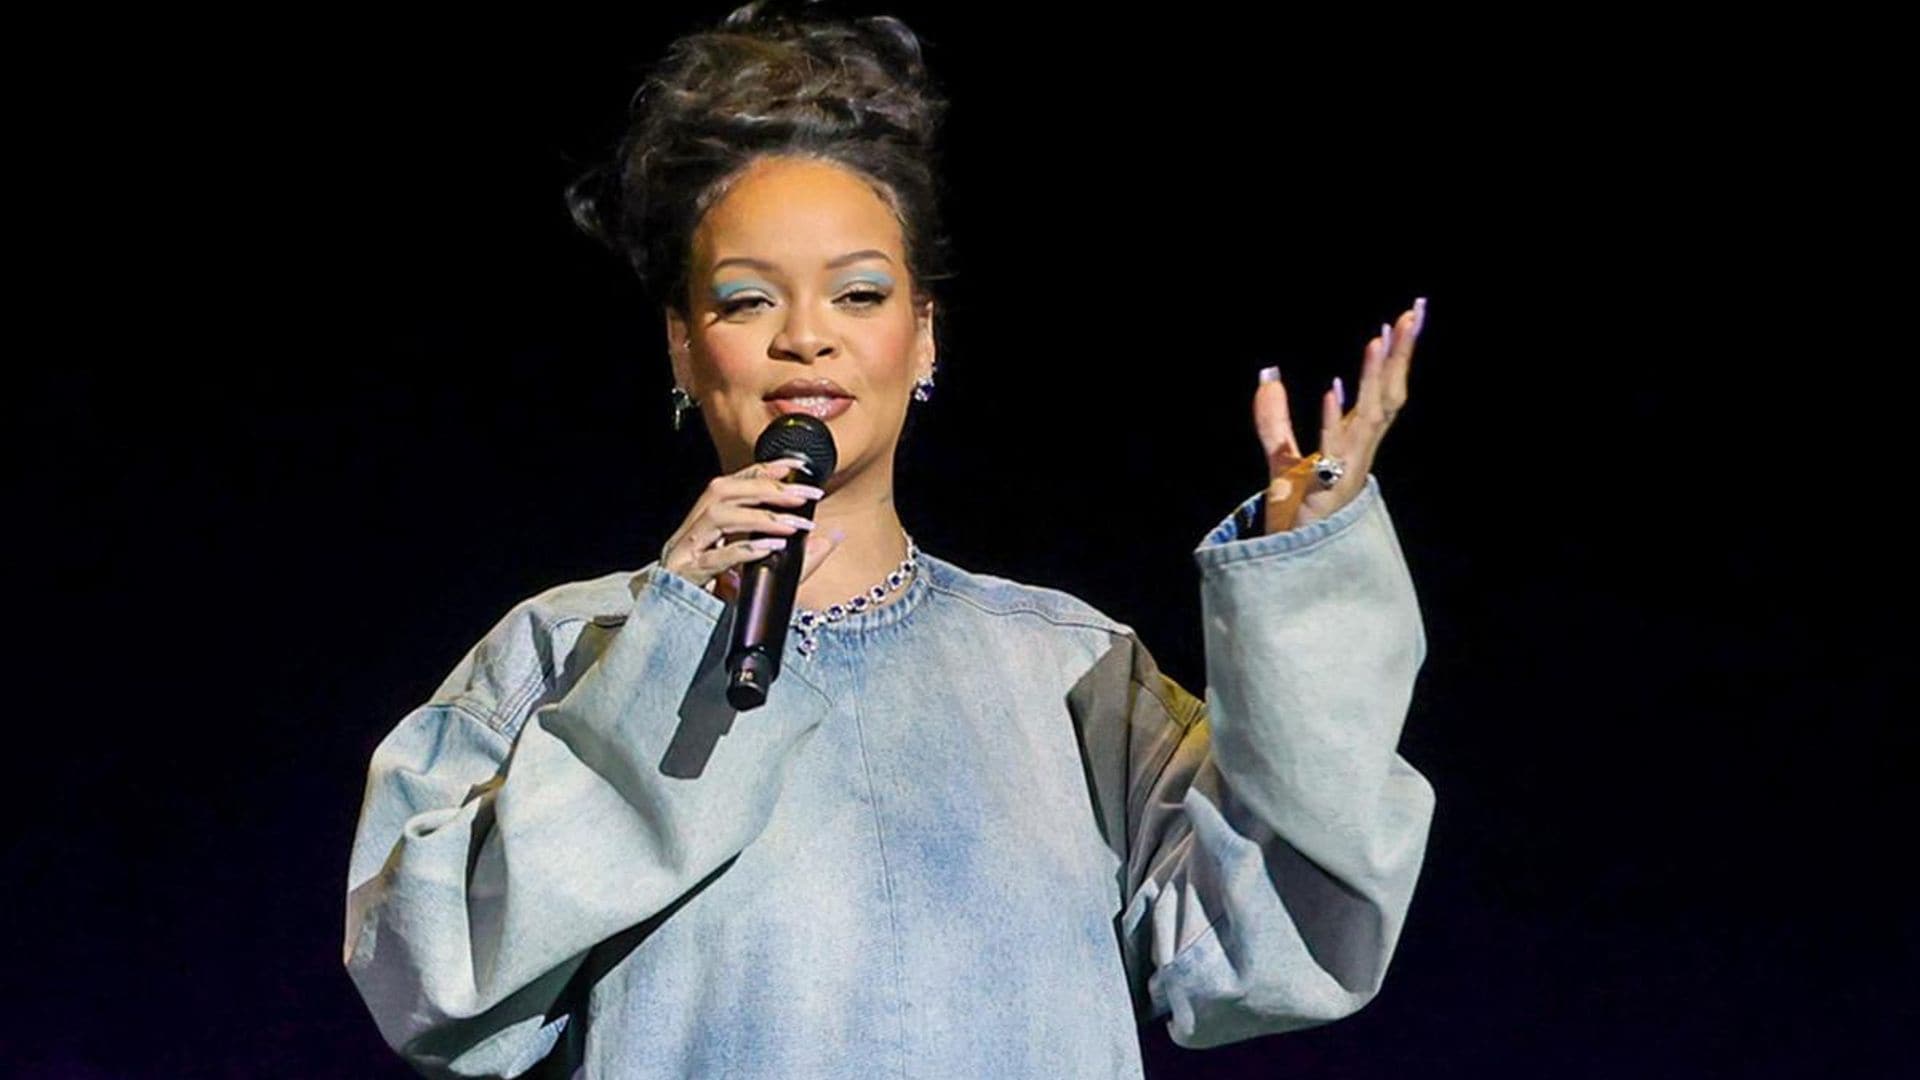 Pregnant Rihanna announces her next acting role wearing an outfit true to its theme